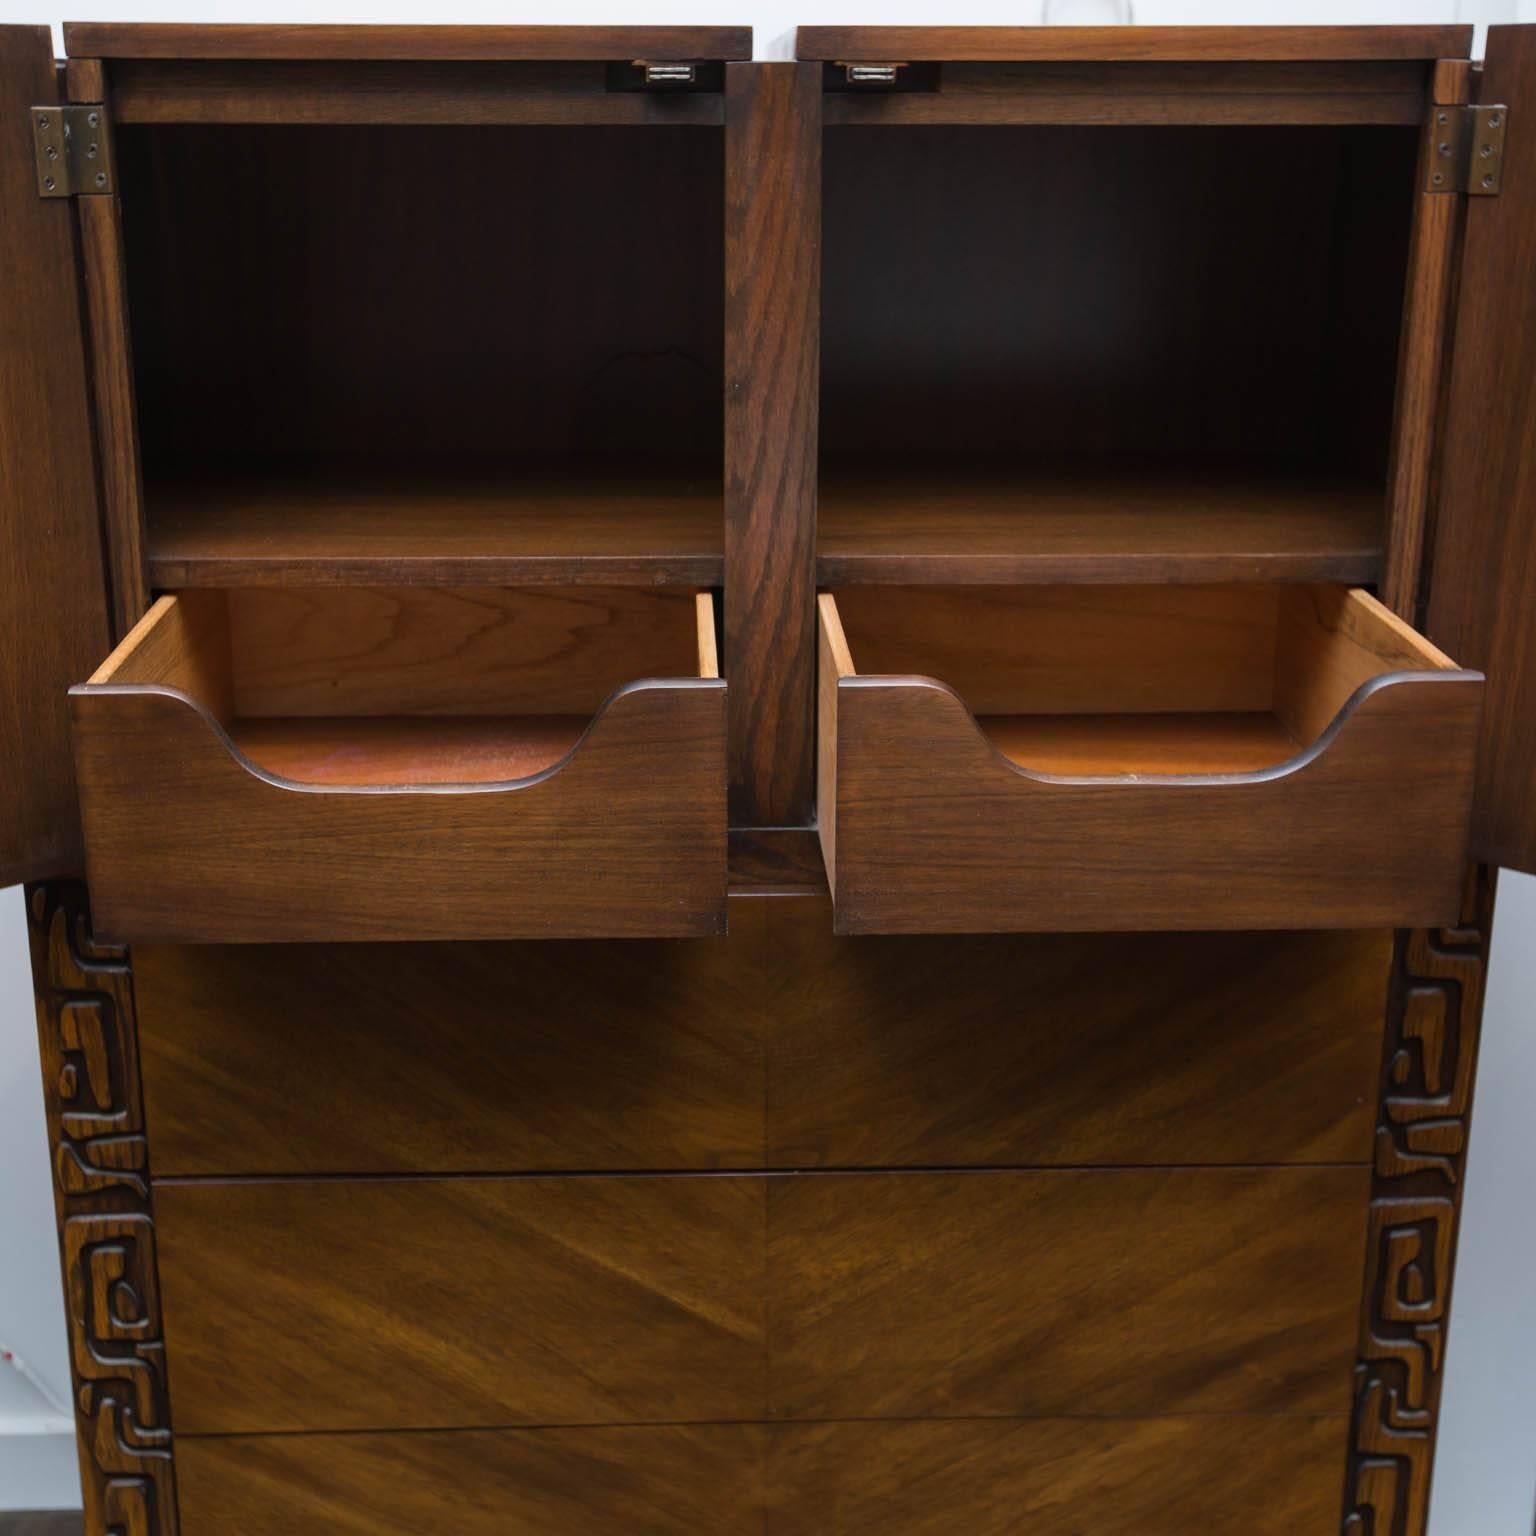 Nice twist on the brutalist movement, with a hint of Kon Tiki. Well built from hardwoods and bookmatched walnut veneers, this piece features an upper compartment for sweaters an bigger items with two small drawers and three generous drawers below